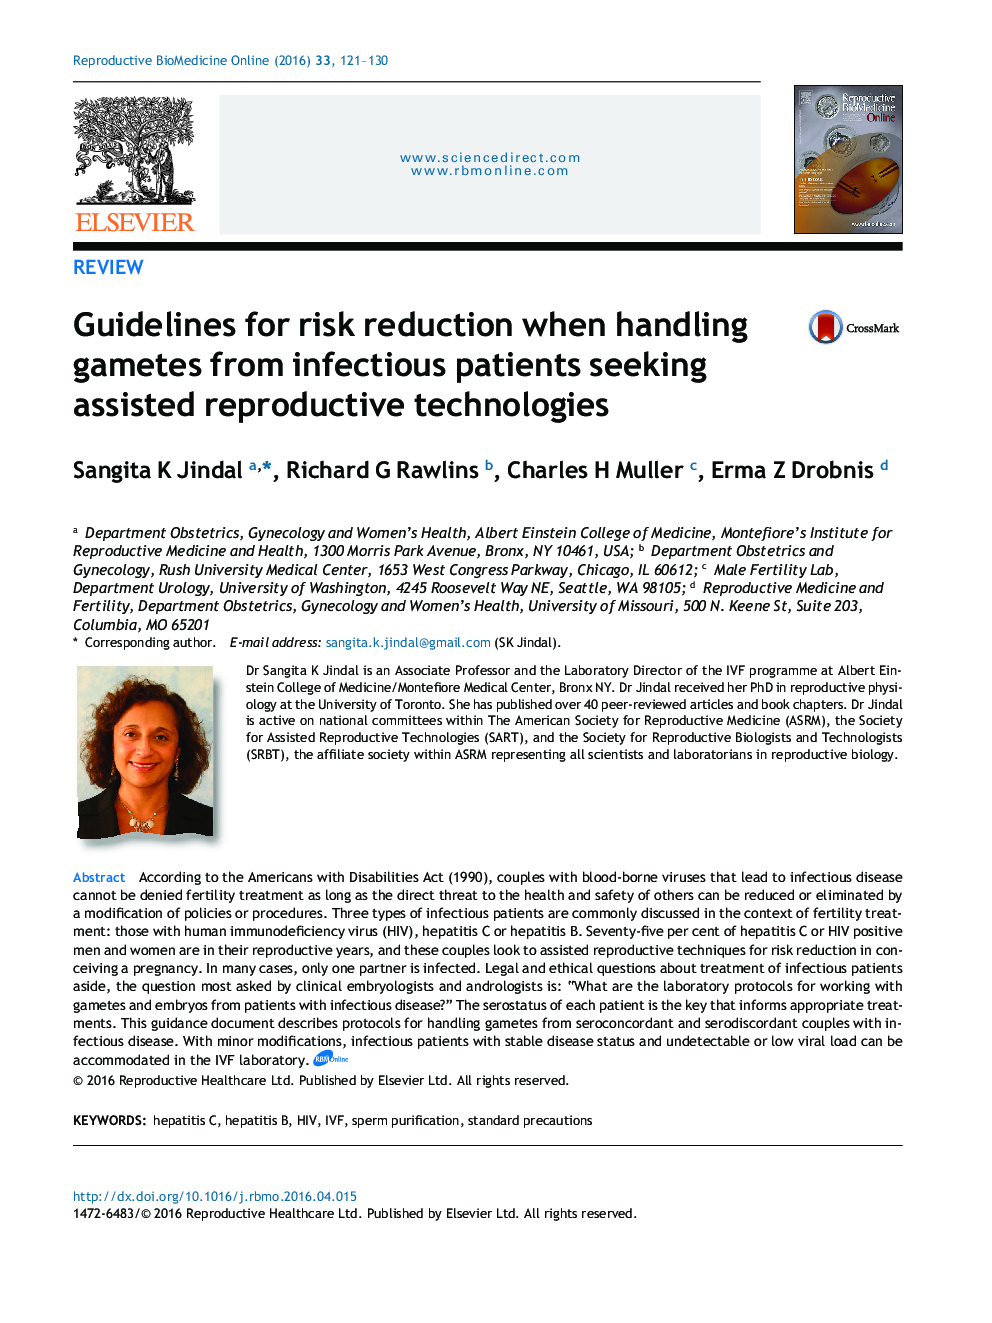 Guidelines for risk reduction when handling gametes from infectious patients seeking assisted reproductive technologies